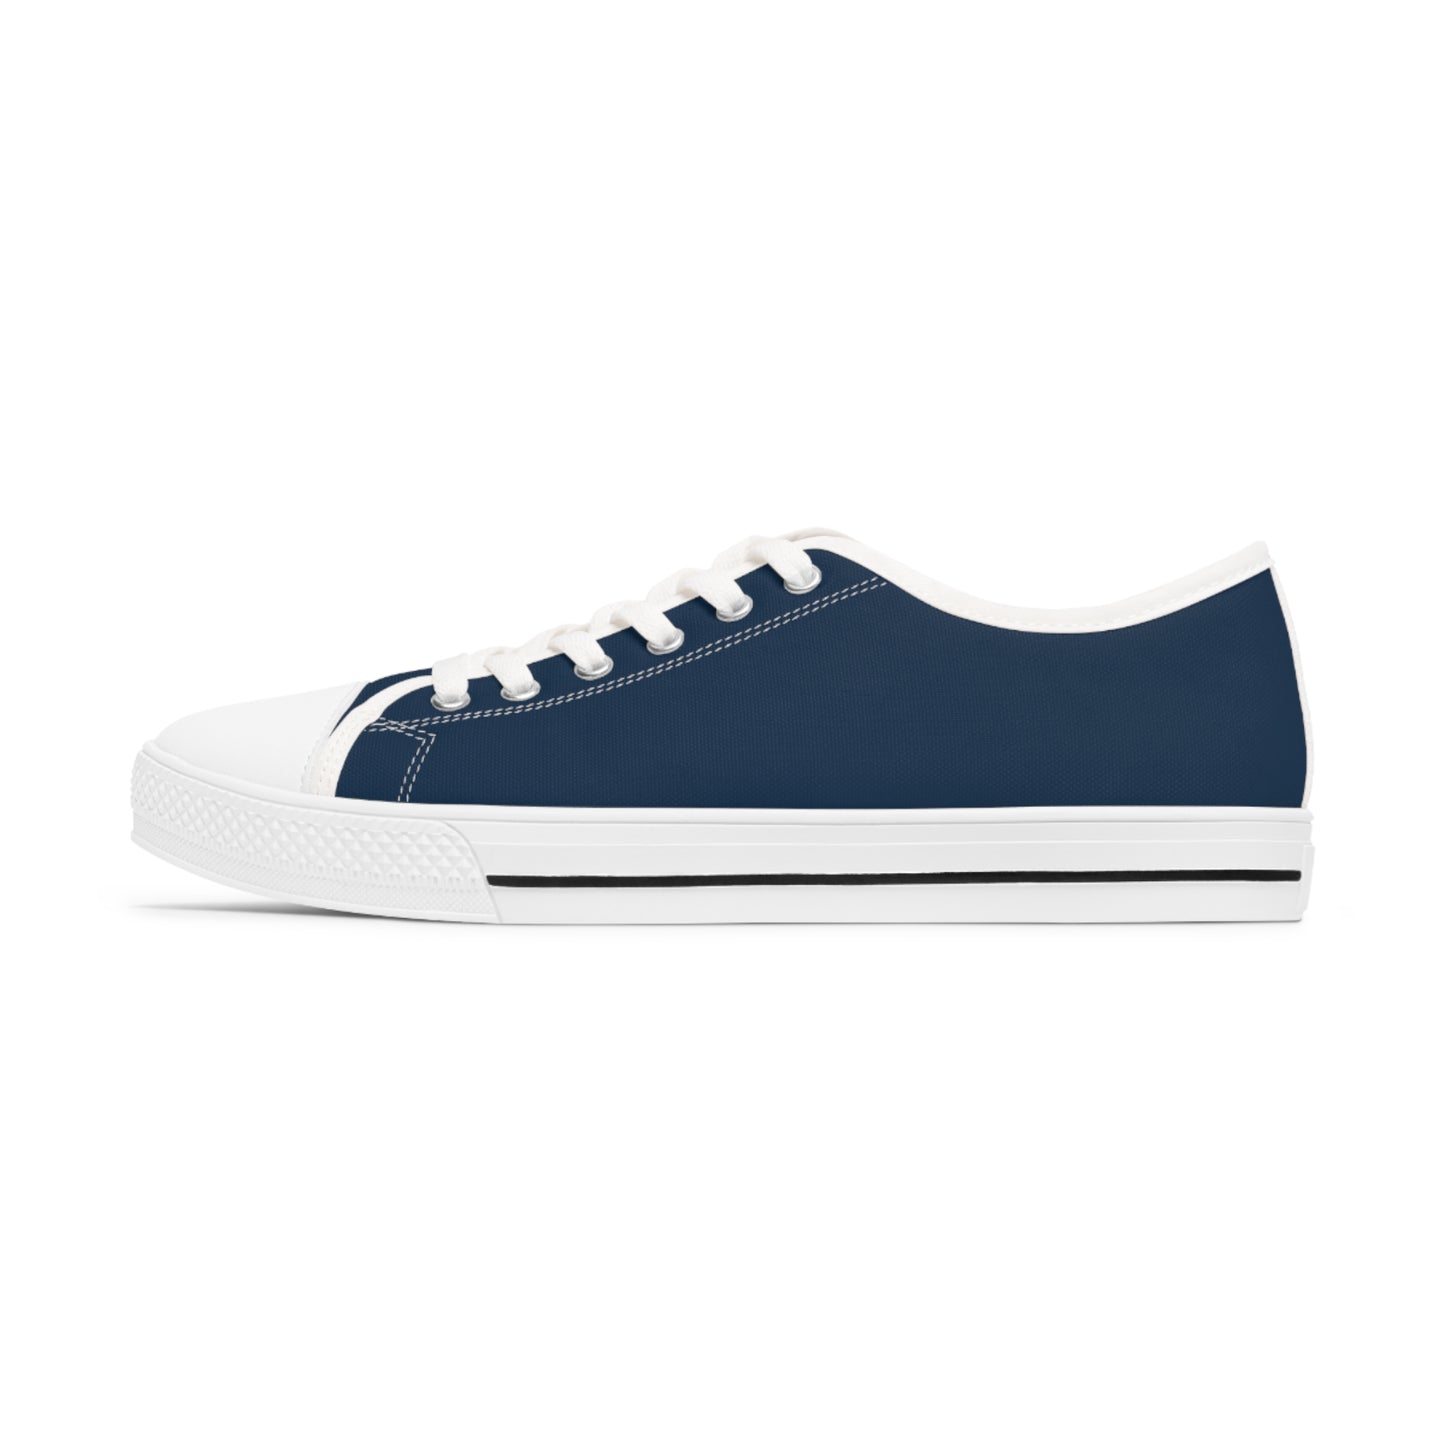 Women's Canvas Low Top Solid Color Sneakers - Ink Blue US 12 White sole